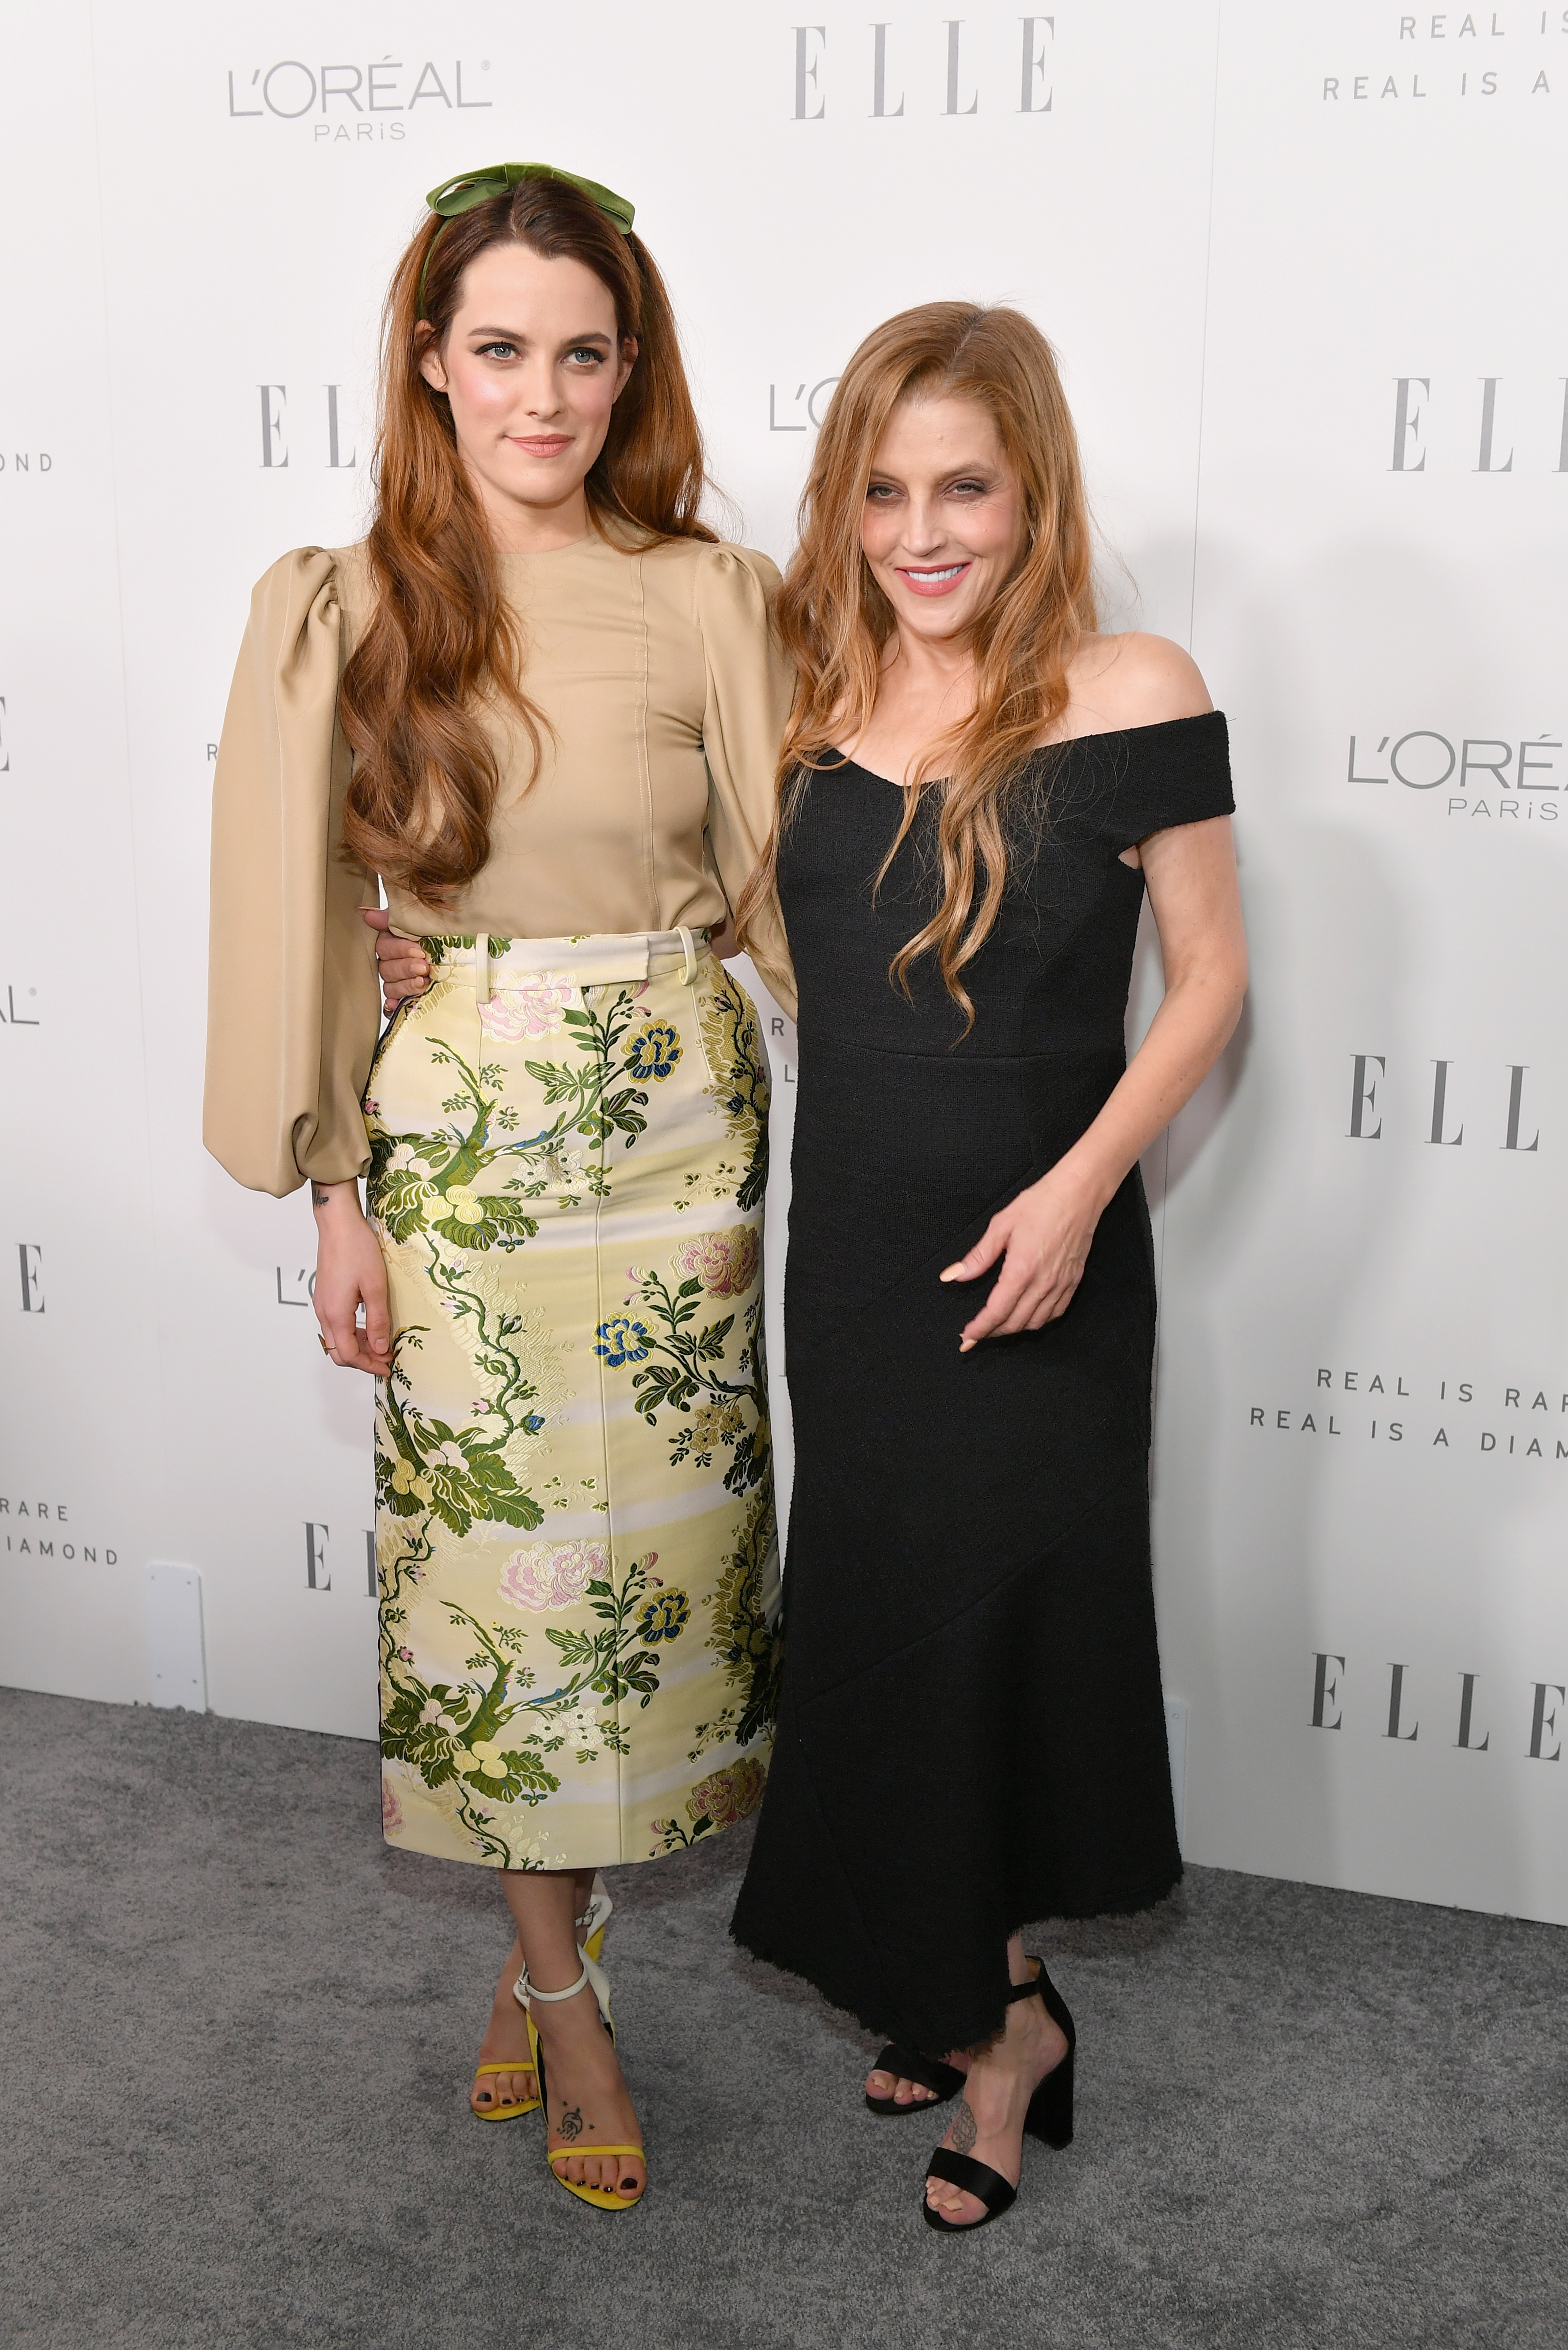 Riley Keough and Lisa Marie Presley at ELLE's 24th Annual Women in Hollywood Celebration in Los Angeles, California on October 16, 2017 | Source: Getty Images